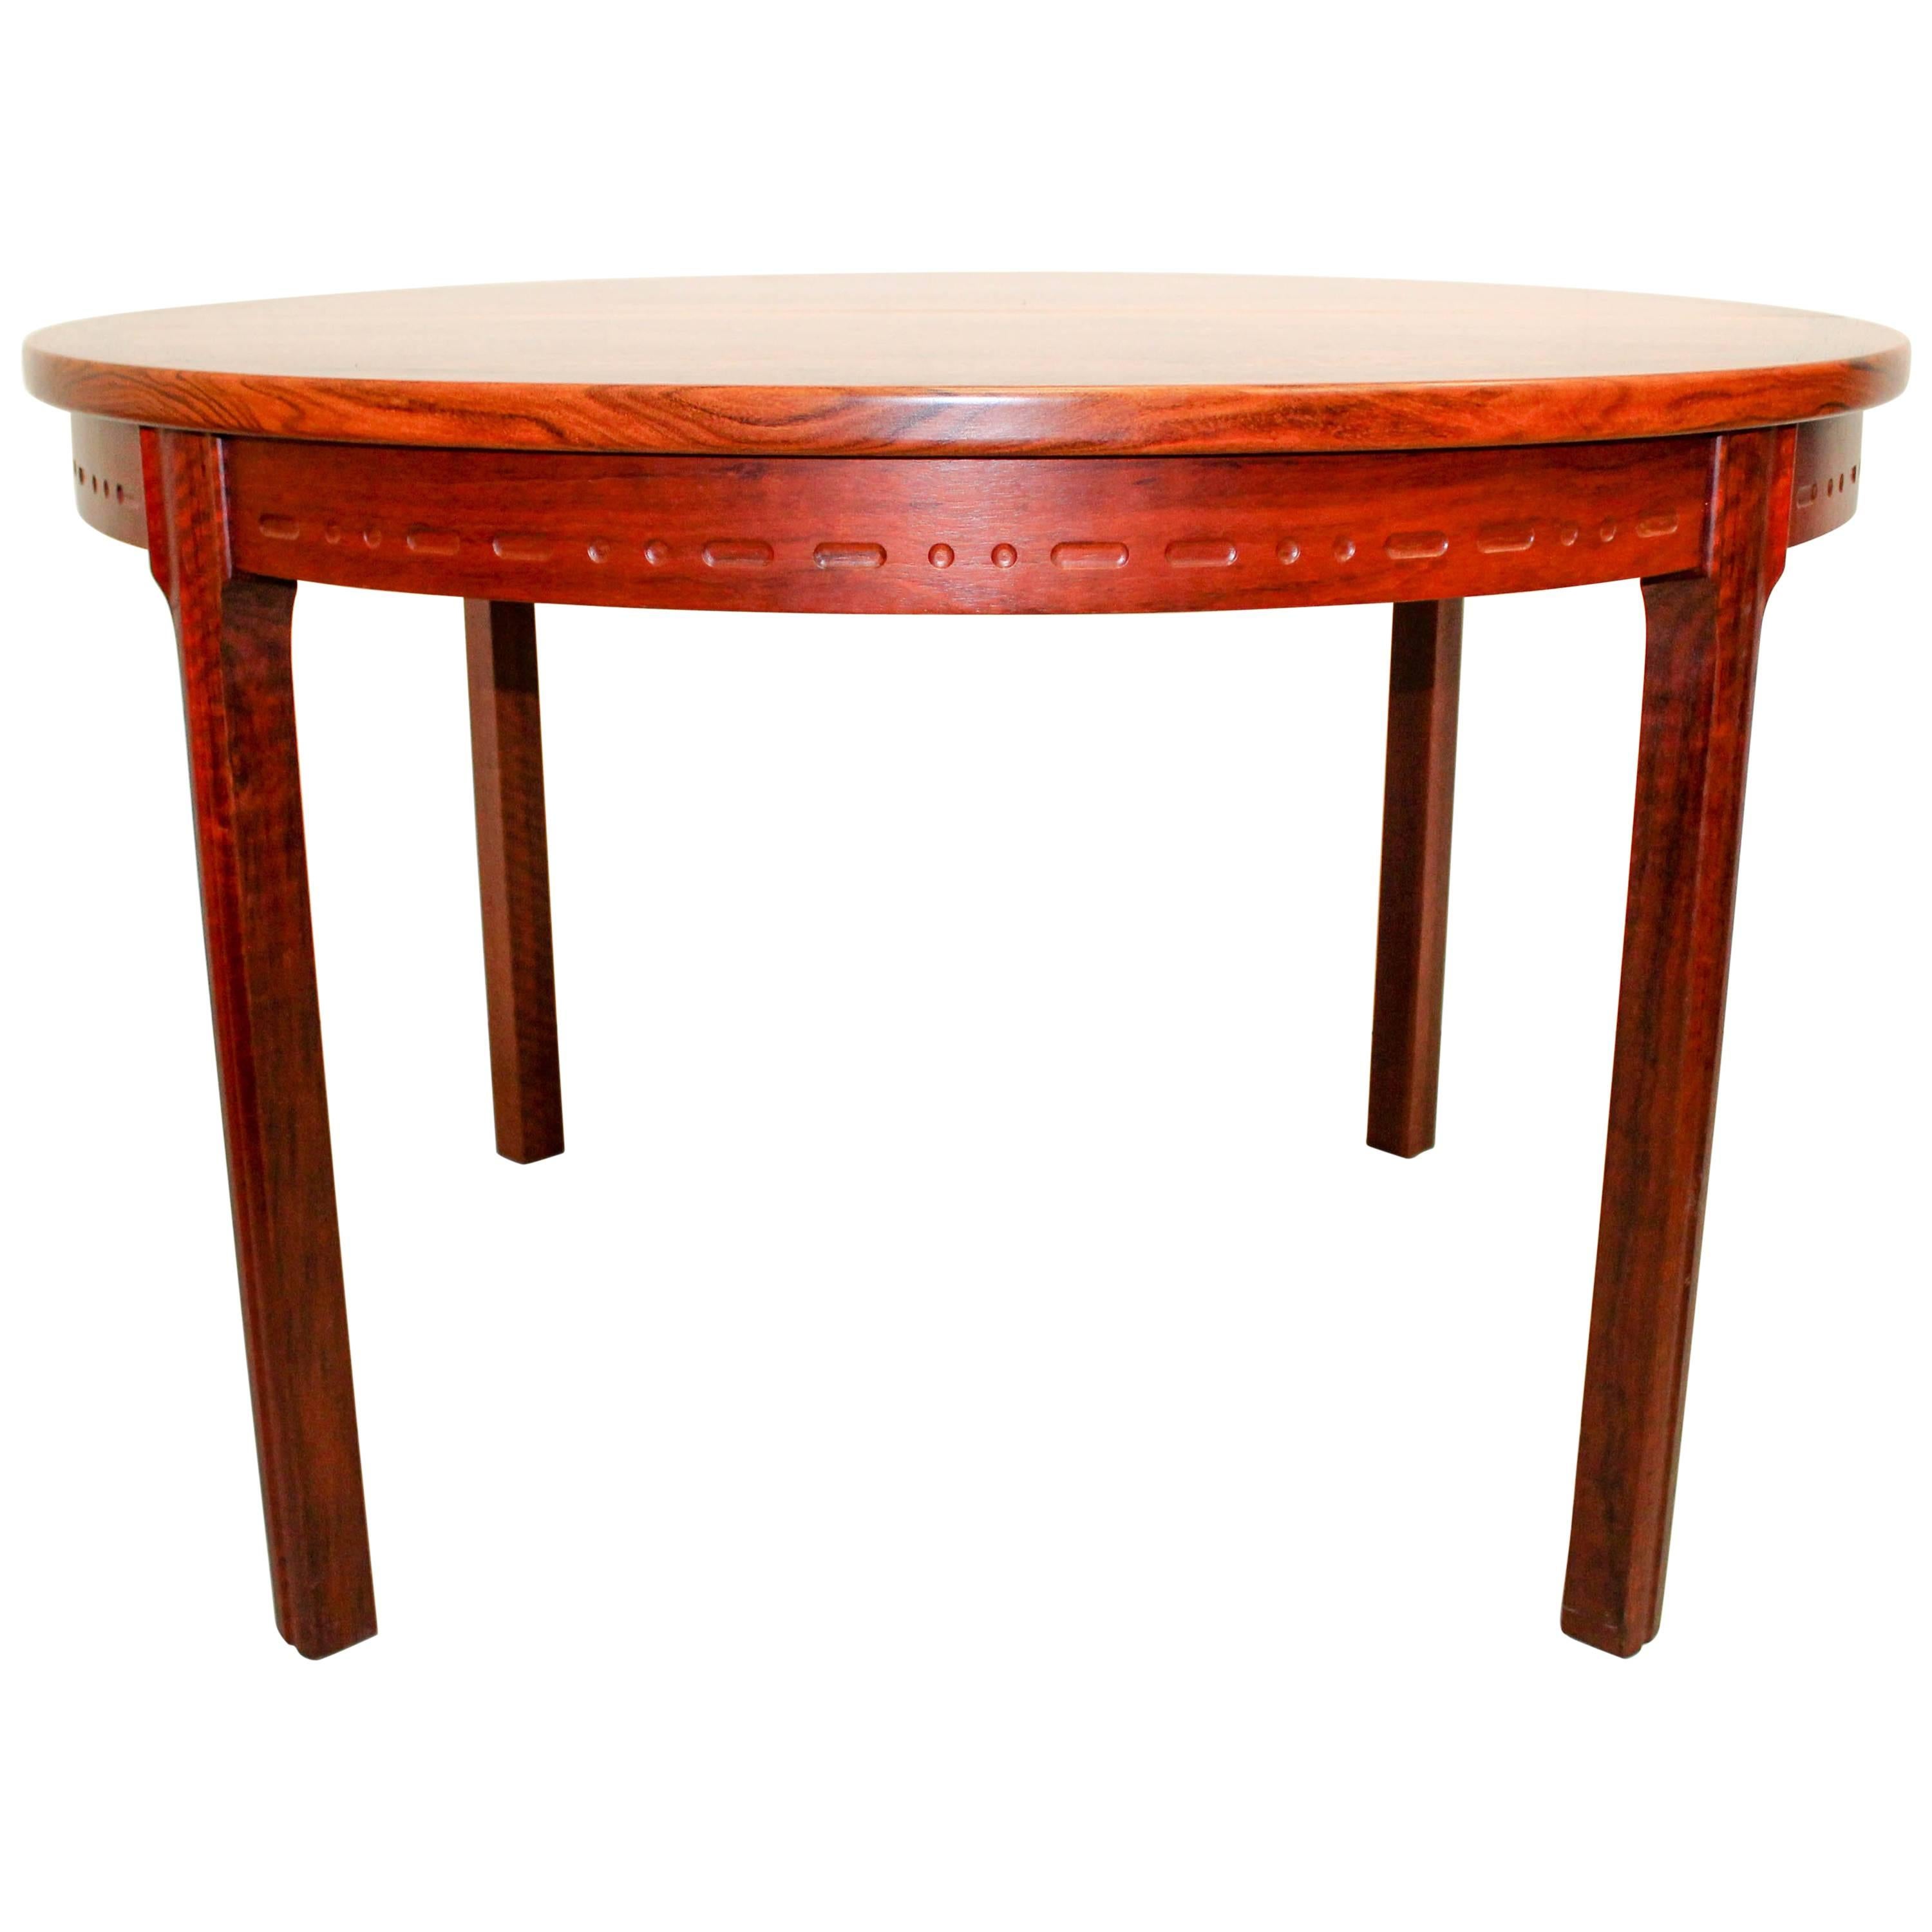 Midcentury Round Swedish Rosewood Dining Table with Two Leafs For Sale